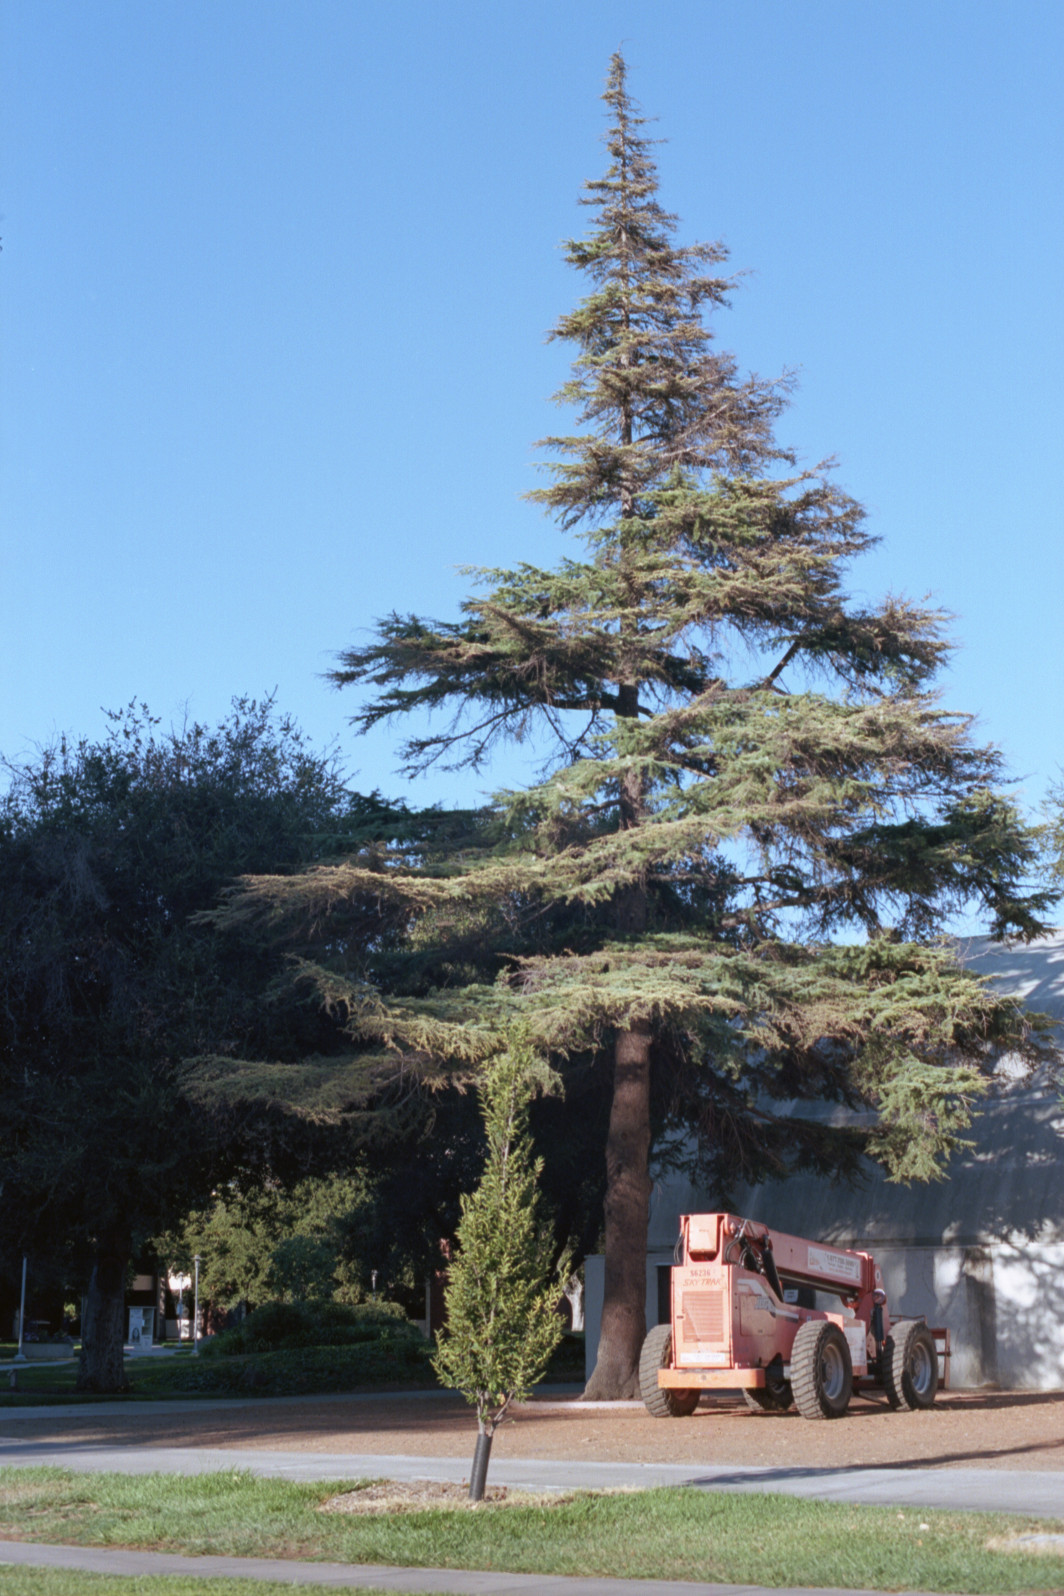 This cedar at San José City College is a masterpiece of arboreal nature, in the soft elegance of the branches. The tree is sheltering a truck that has a platform for work far above the ground.